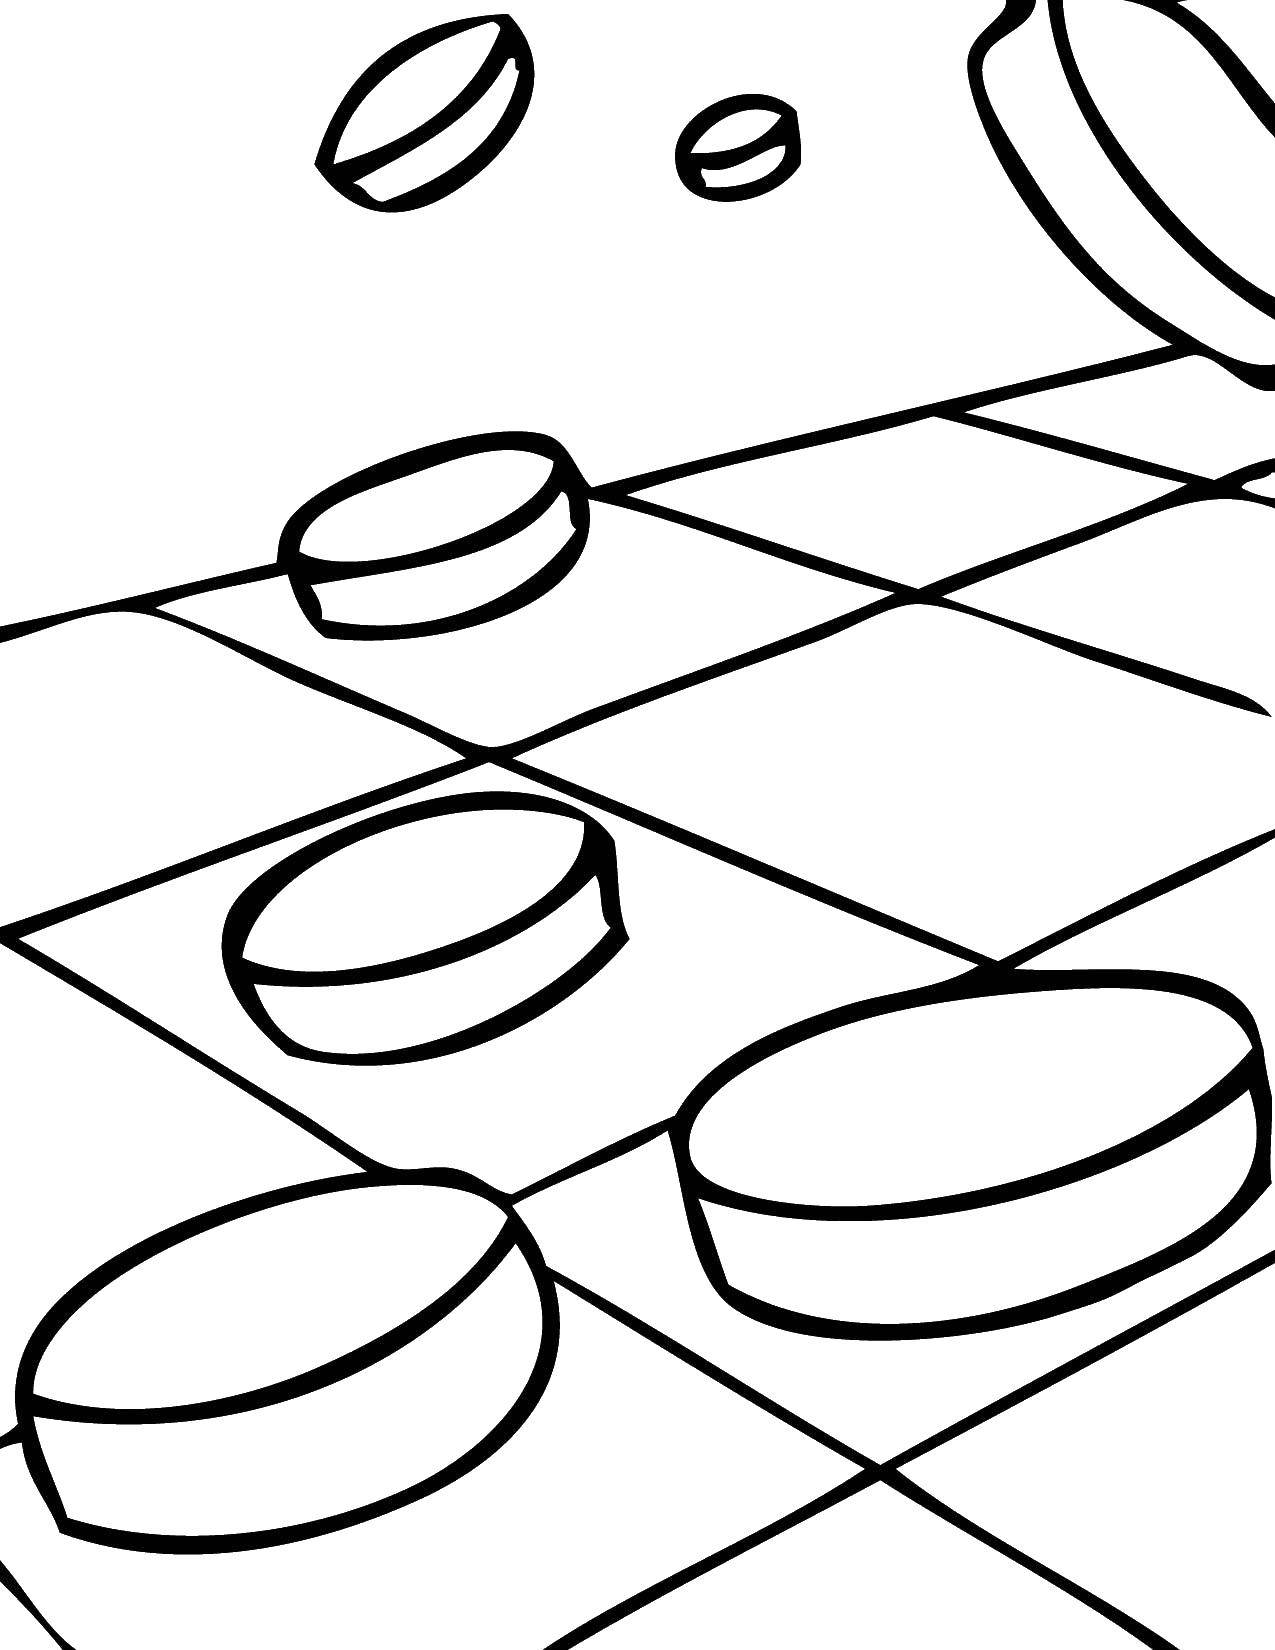 Coloring Checkers game. Category games. Tags:  Games, checkers.